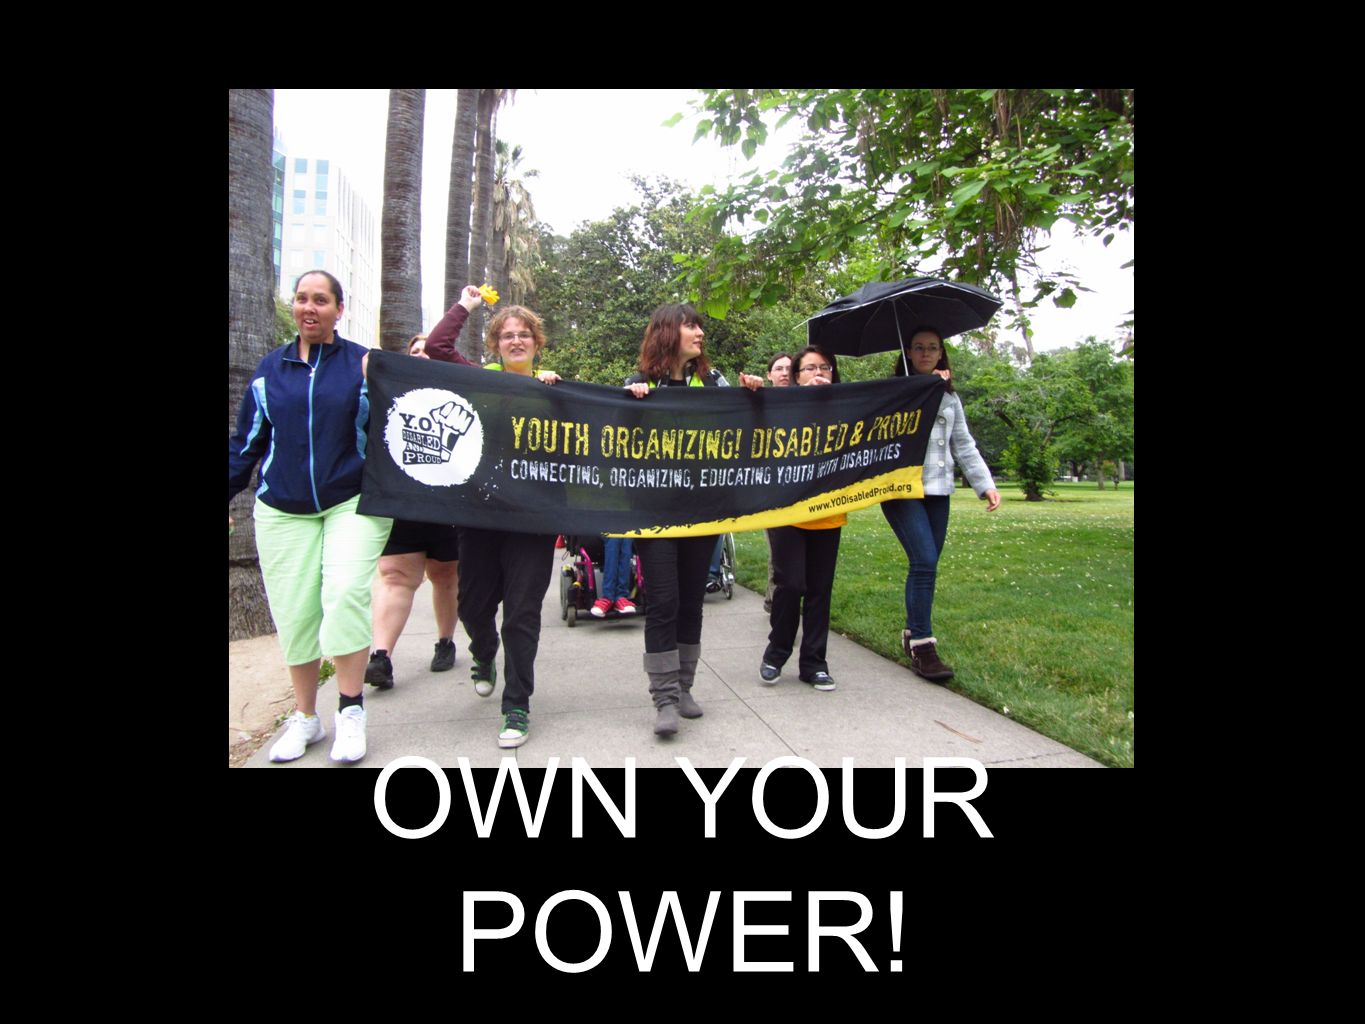 OWN YOUR POWER!